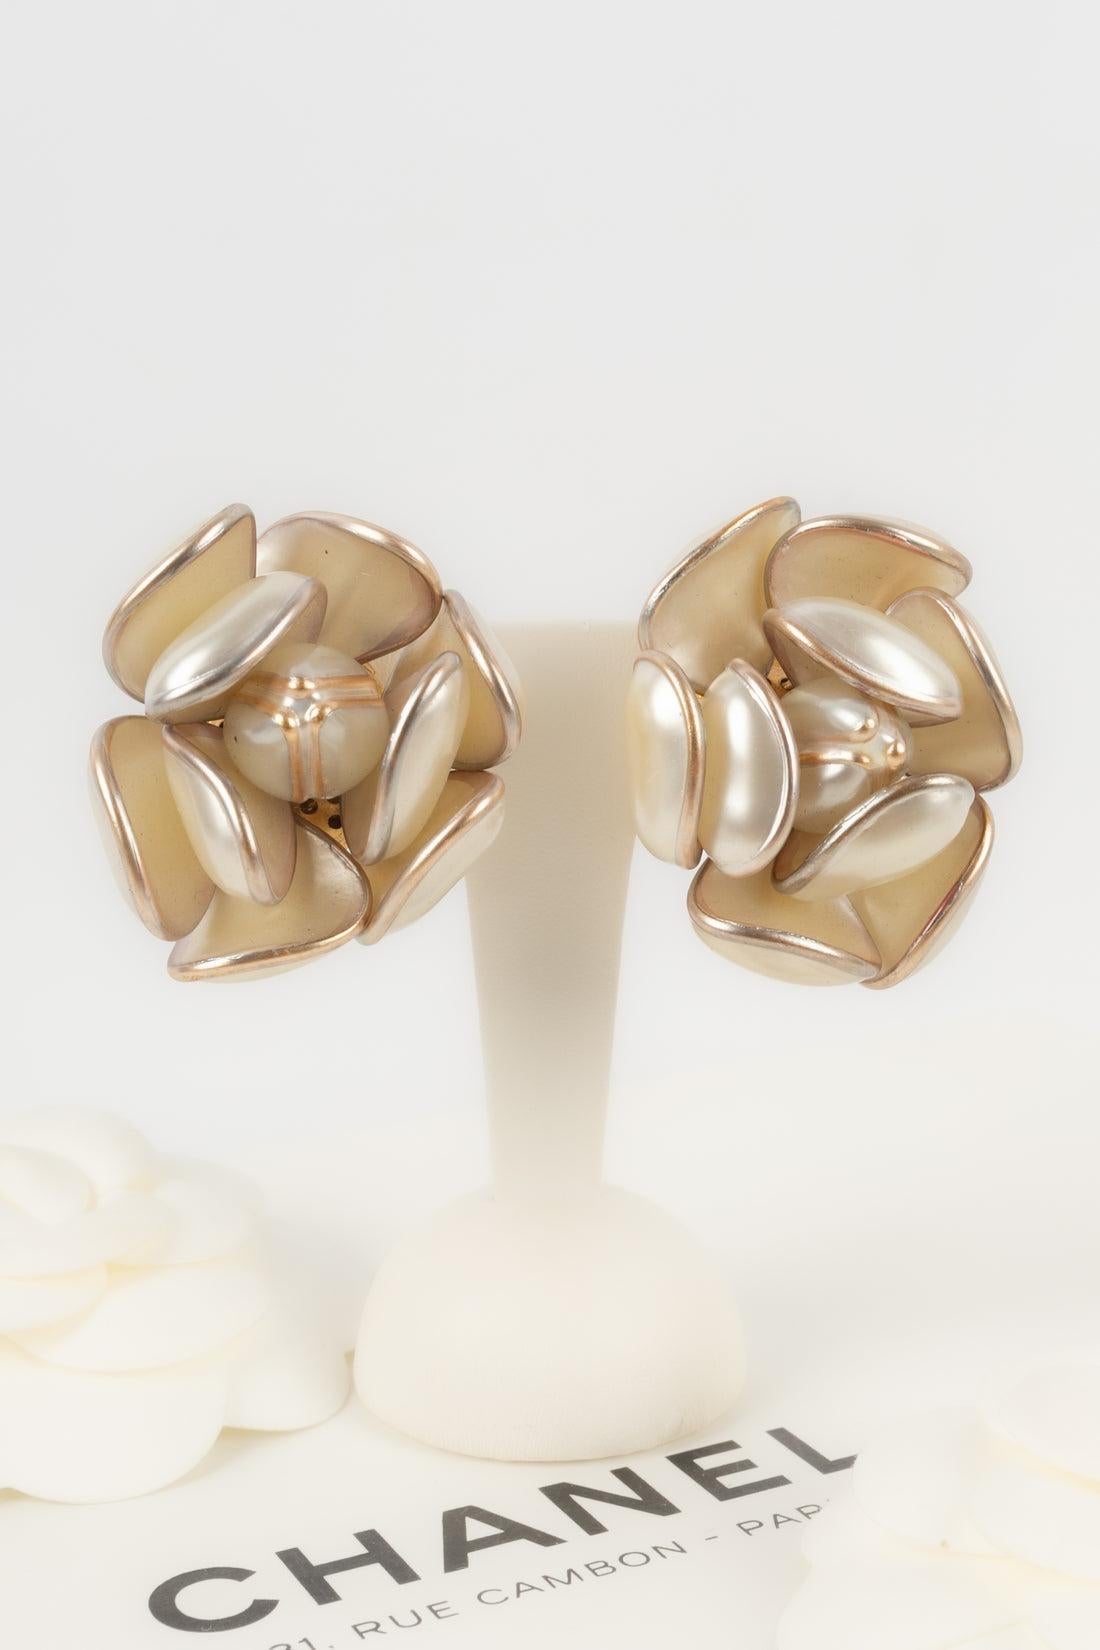 Chanel Golden Metal Clip-on Camellia Earrings For Sale 3